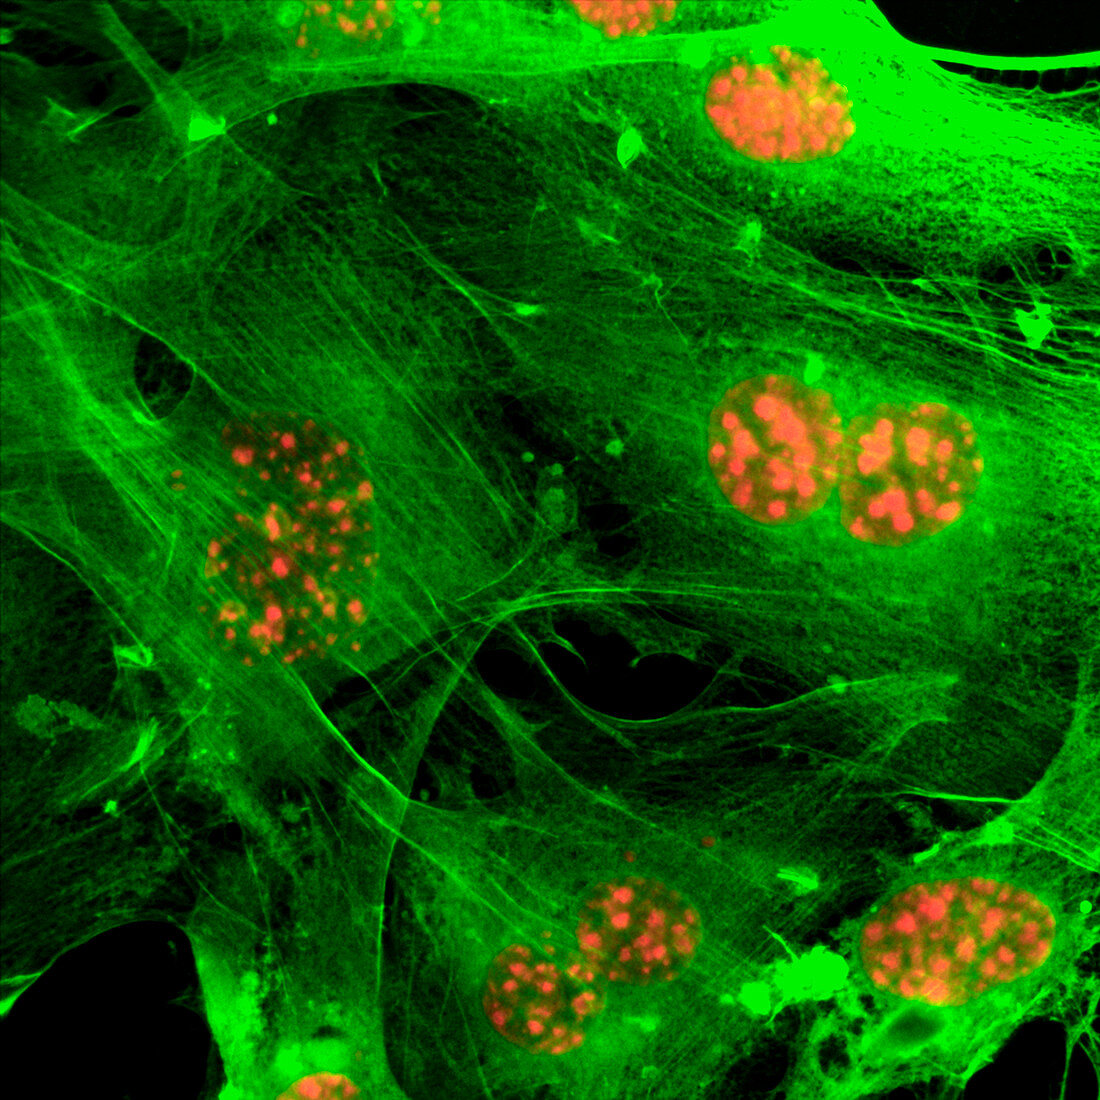 Emerging breast cancer cells